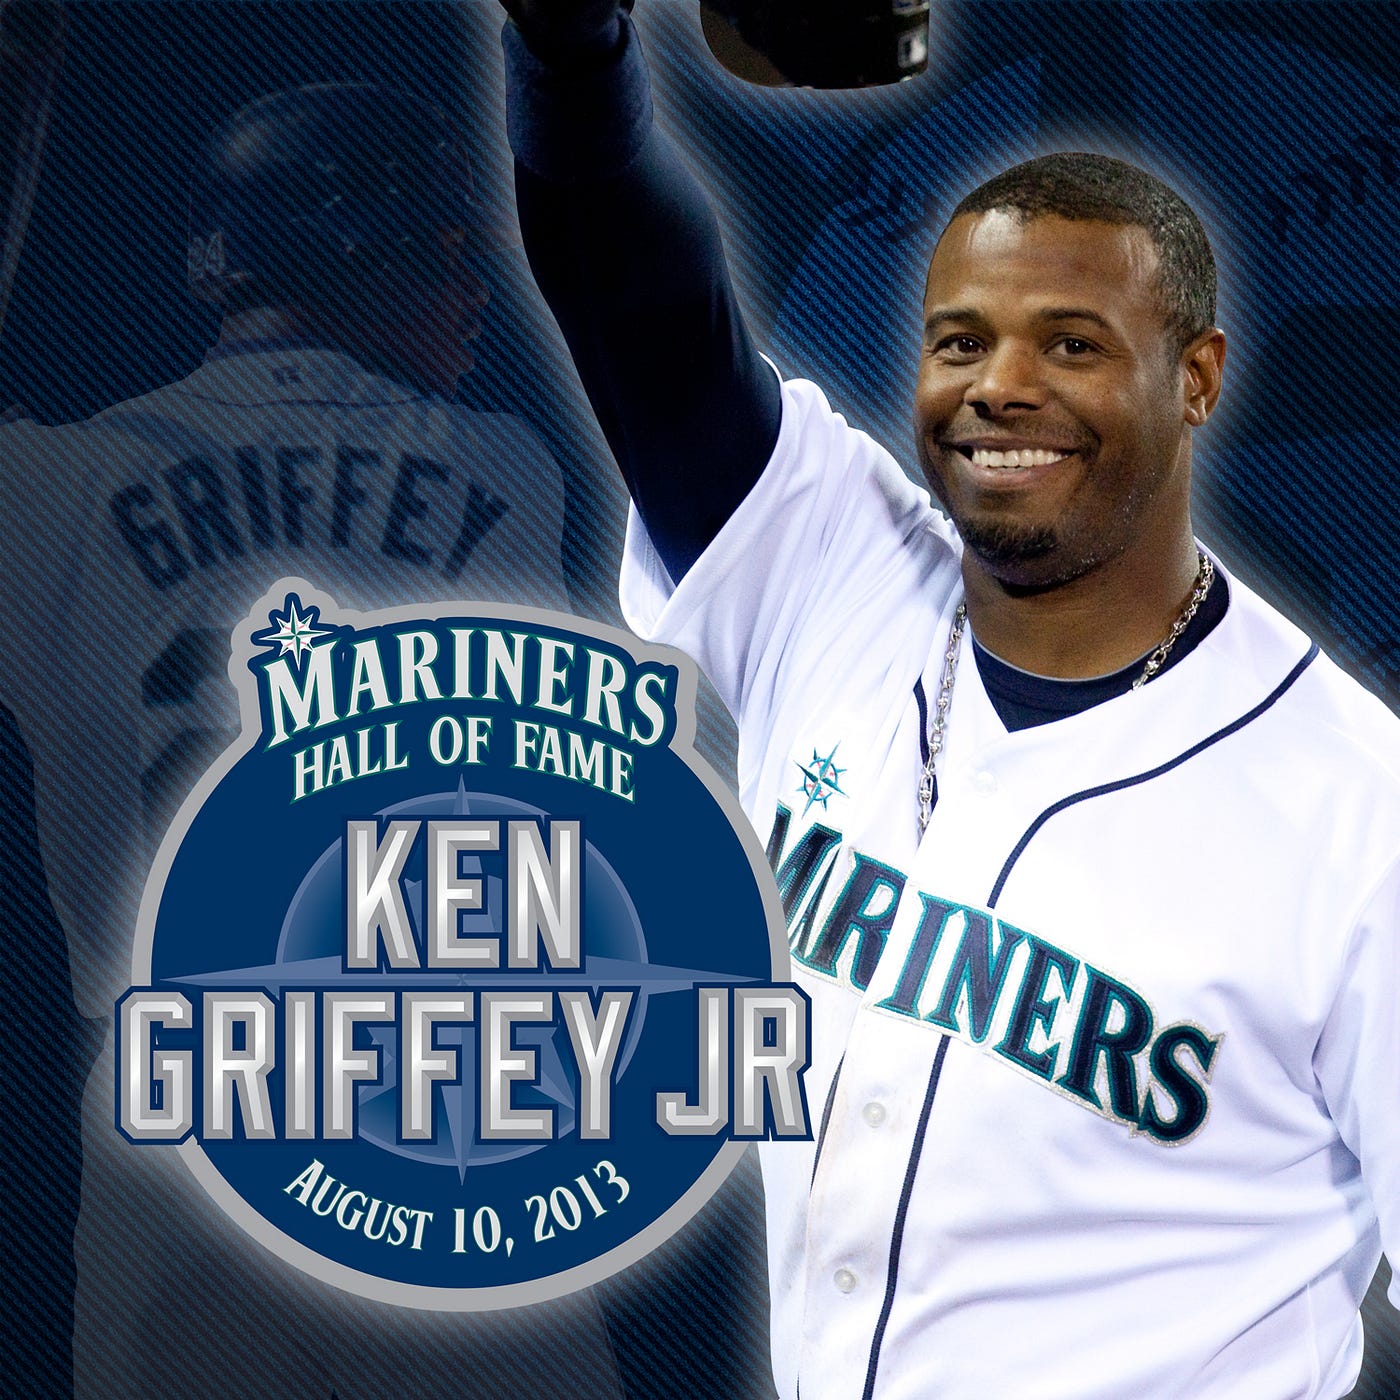 Ken Griffey Jr. To Join Mariners Hall of Fame